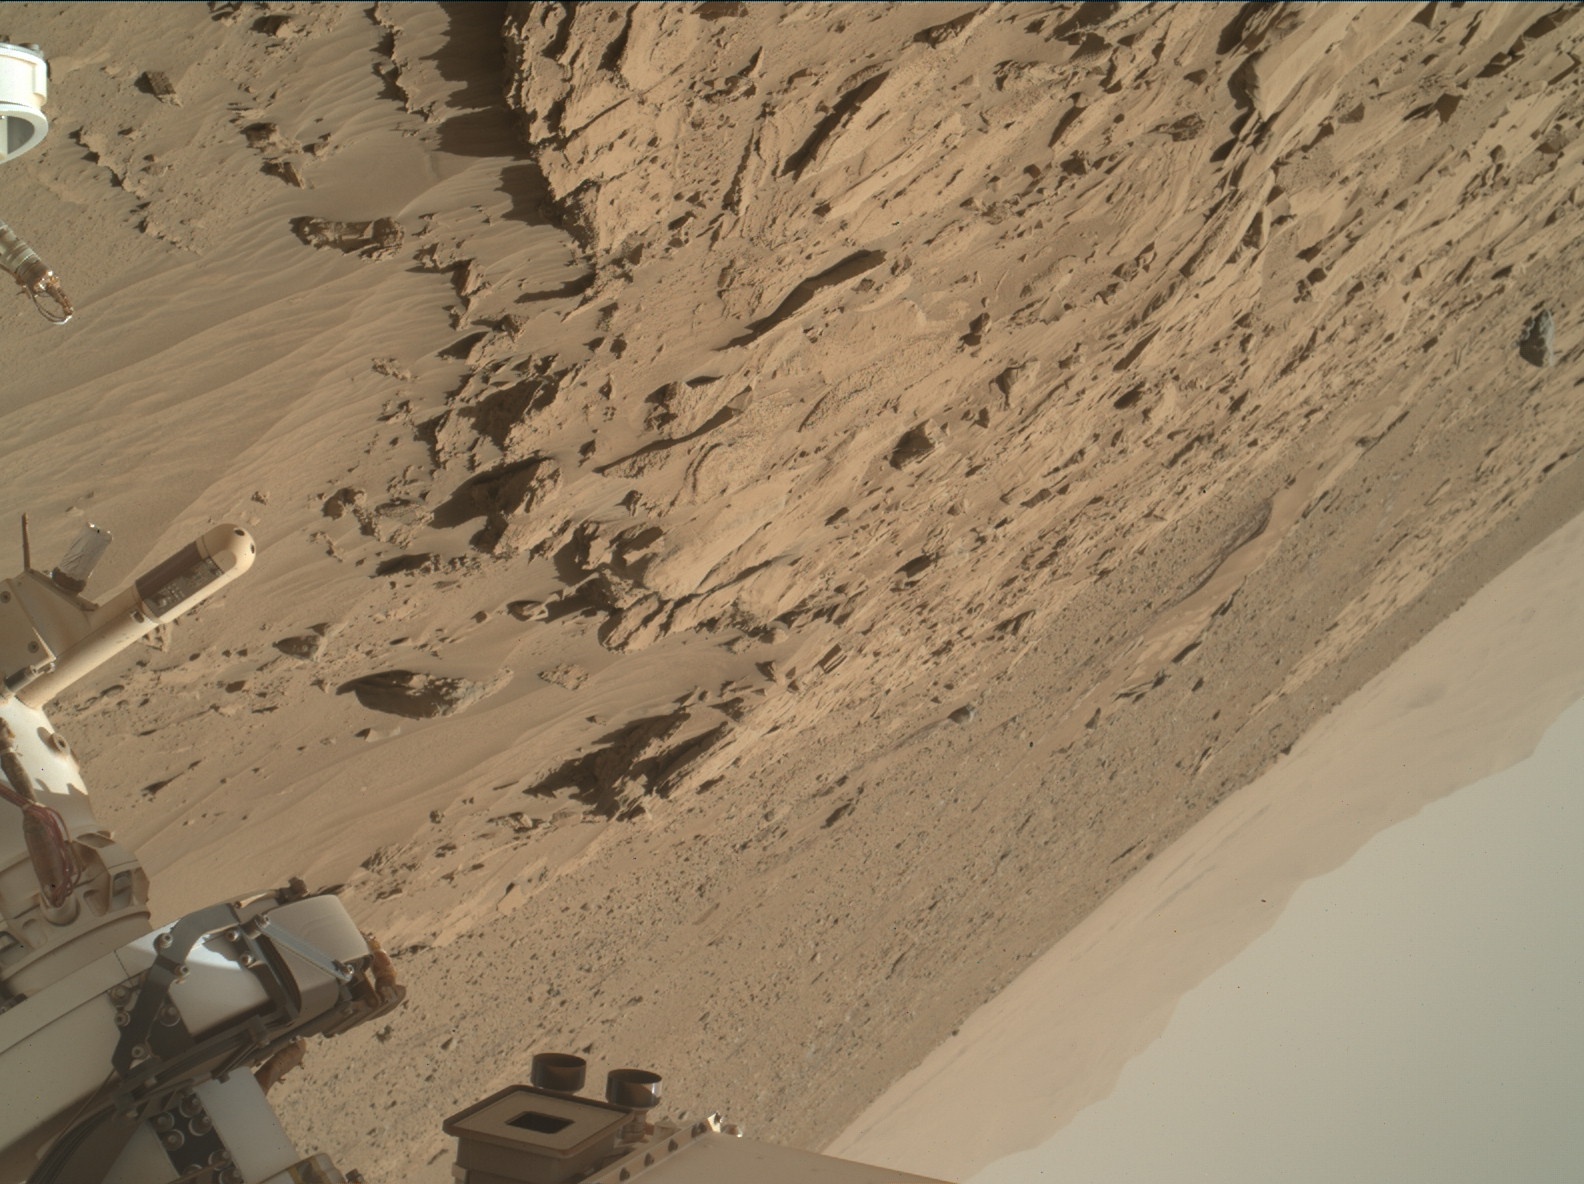 Nasa's Mars rover Curiosity acquired this image using its Mars Hand Lens Imager (MAHLI) on Sol 613, at drive 1330, site number 31